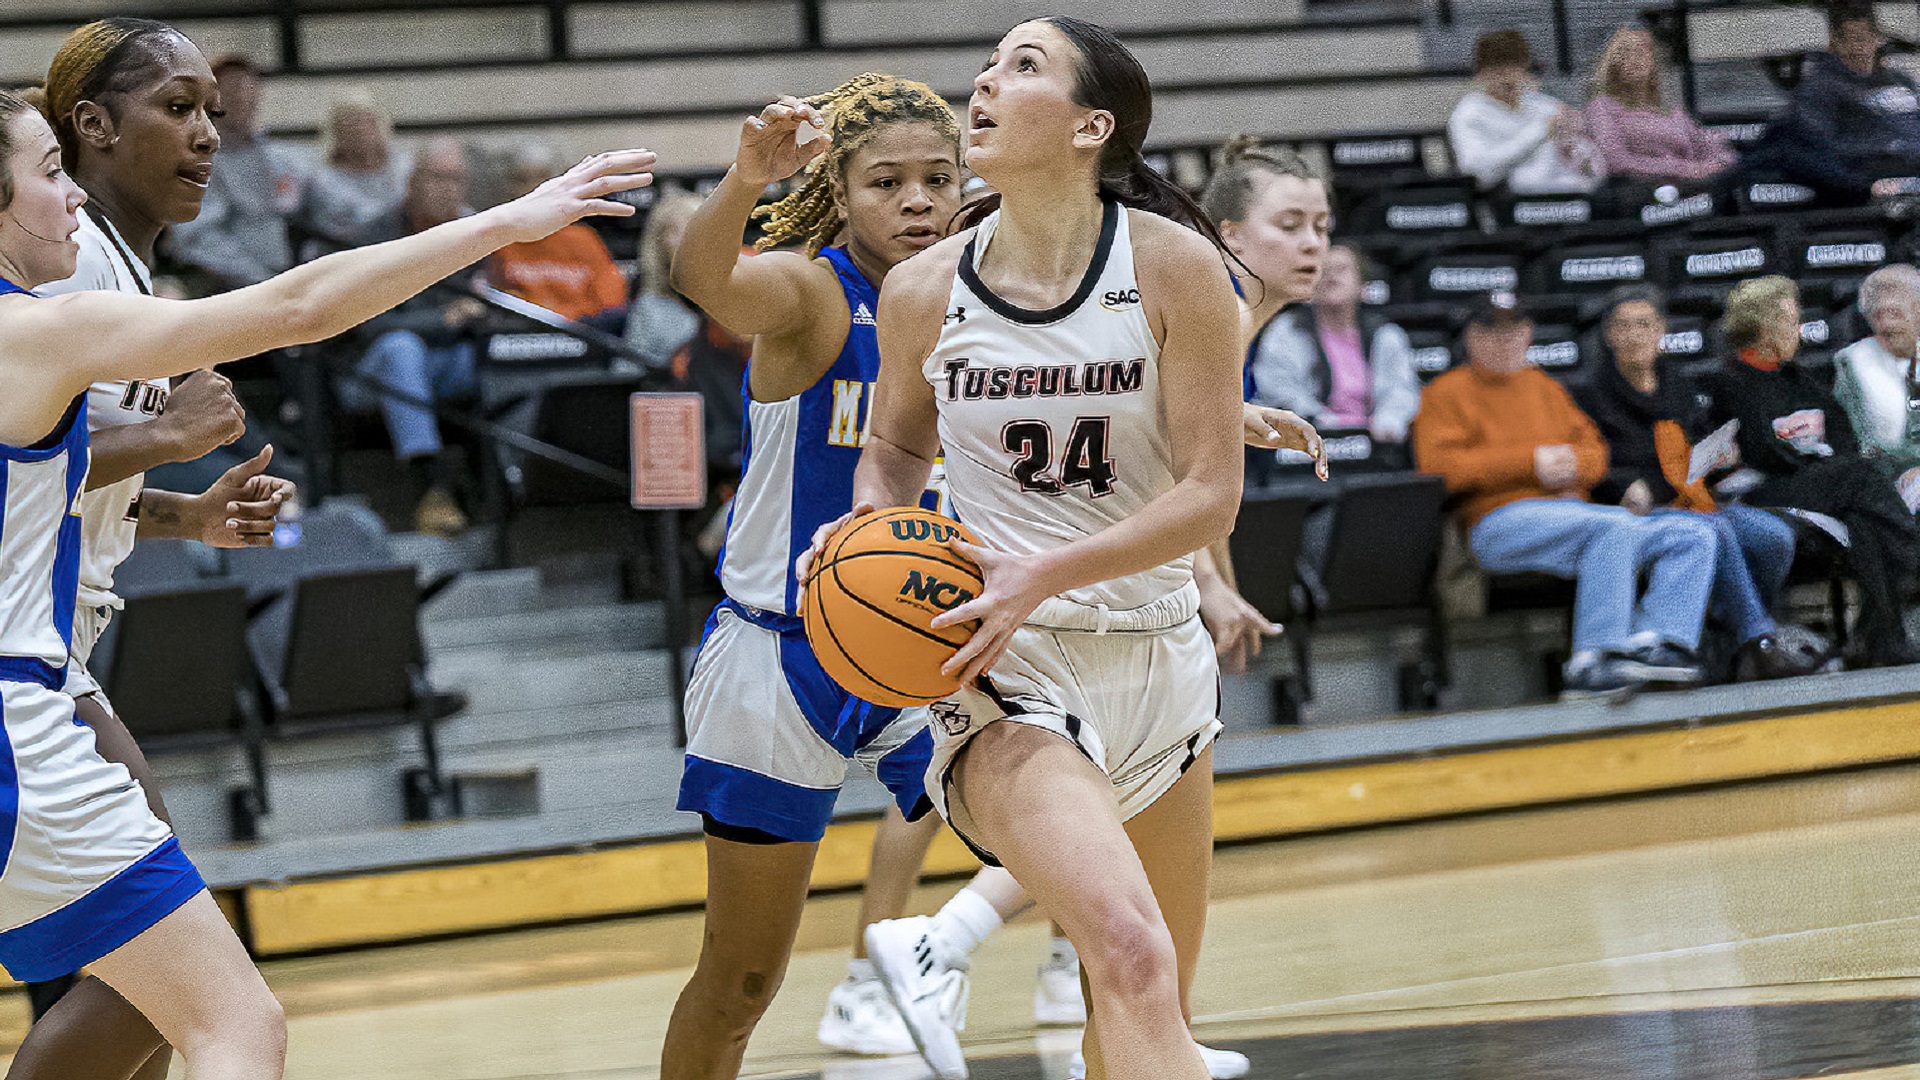 Blayre Shultz scored a career-high 28 points against Mars Hill (photo by Chuck Williams)